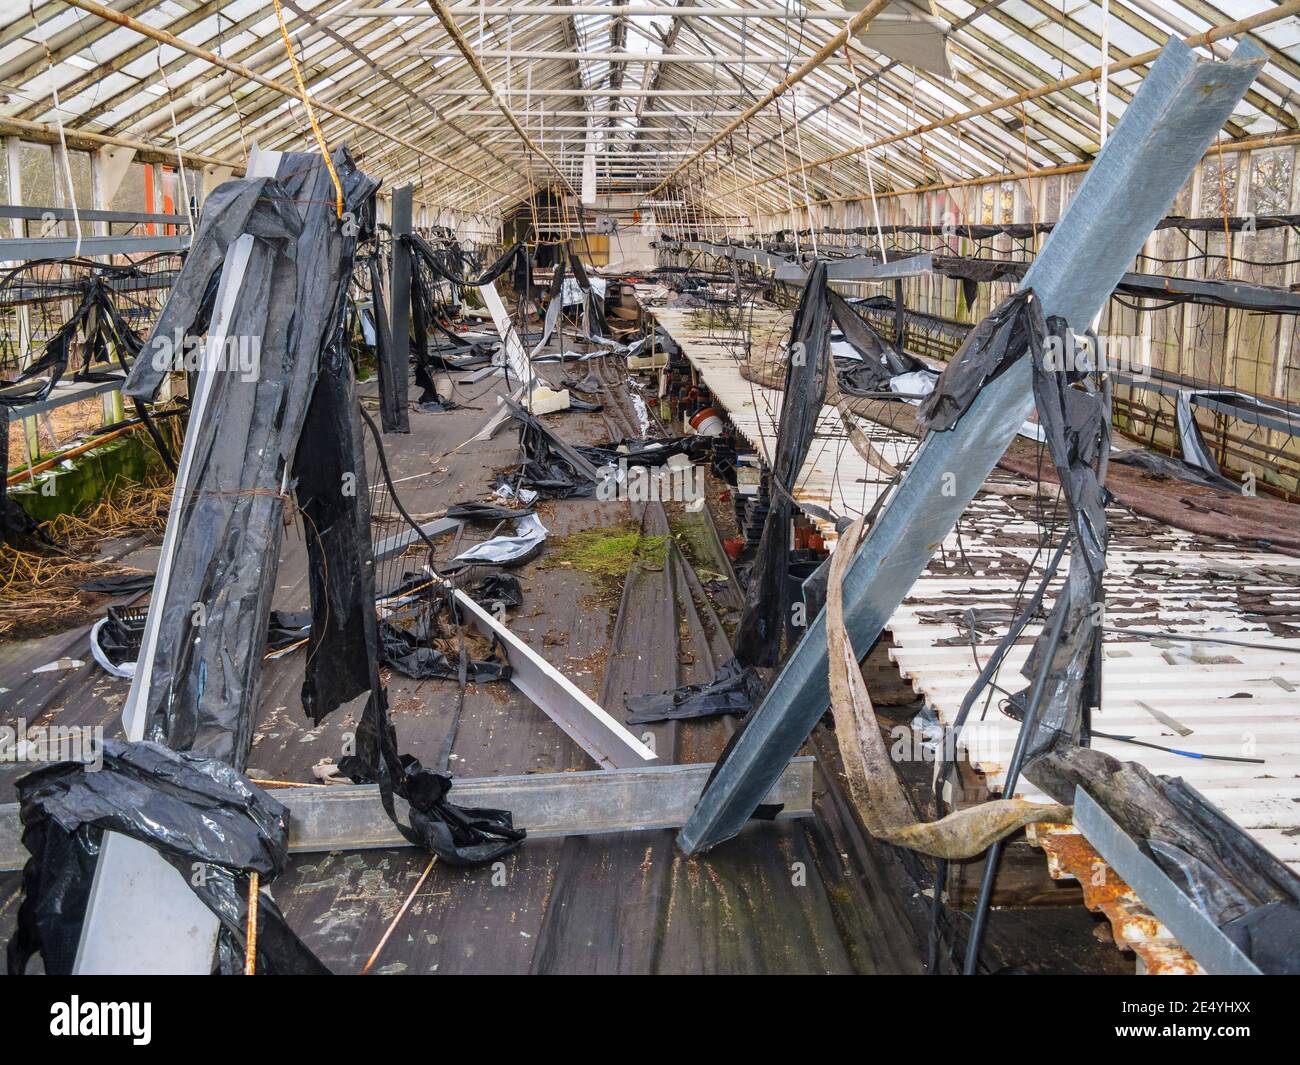 Interior of an old abandoned greenhouse Stock Photo